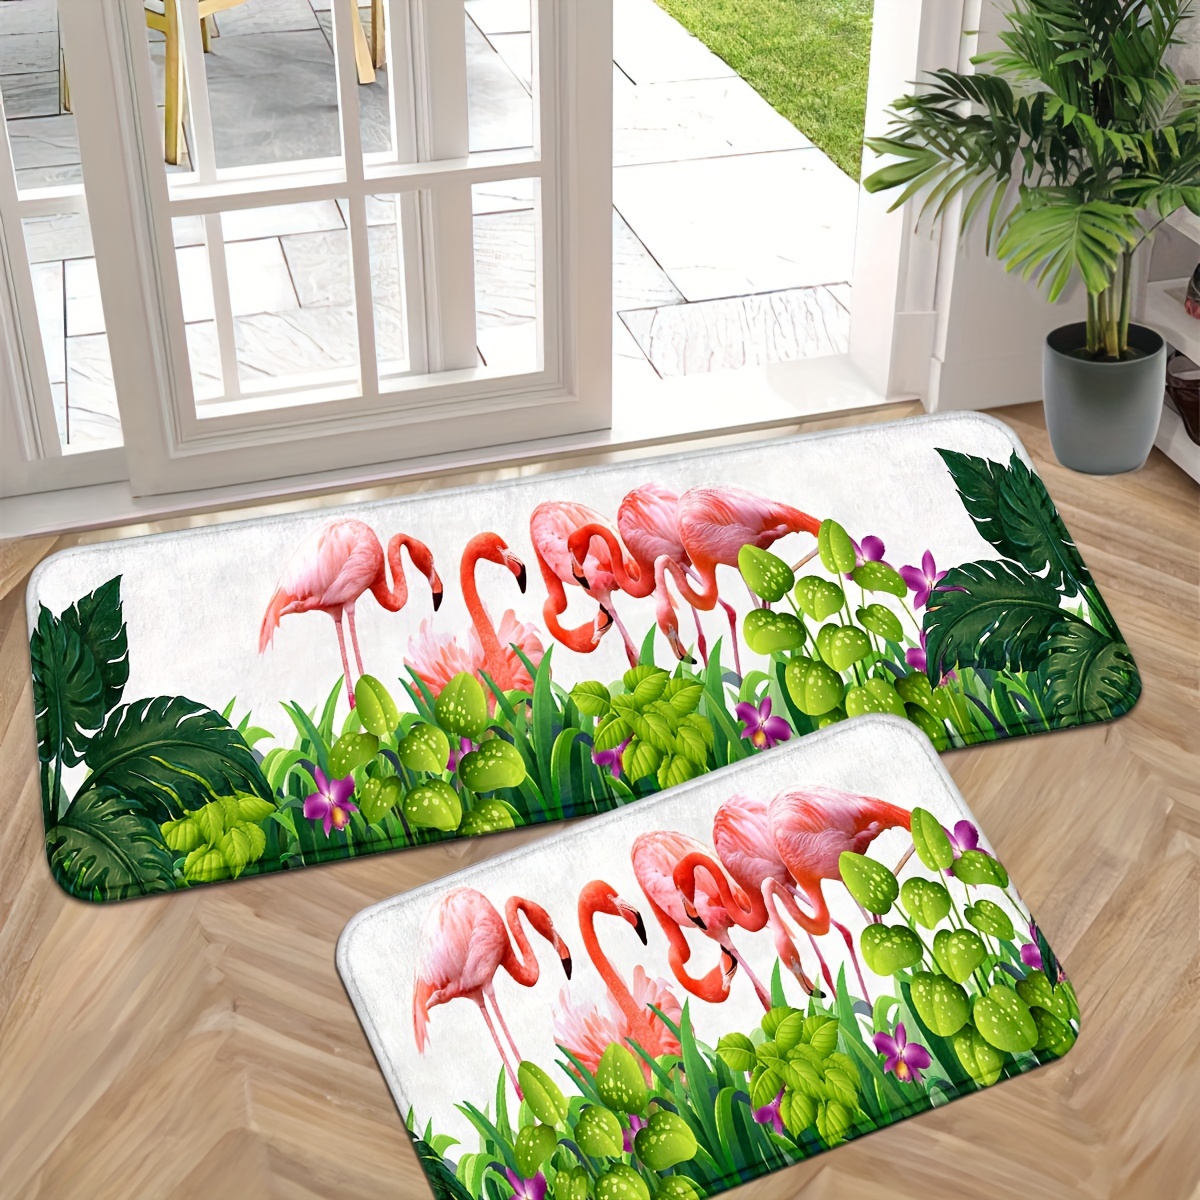 

Flamingo Doormat Set 1pc - Polyester Non-slip Absorbent Rug For Indoor Outdoor Use, Machine Washable Entryway Decorative Carpet - Lightweight, Dirt-resistant Bath Mat For Home, Patio, Kitchen, Bedroom